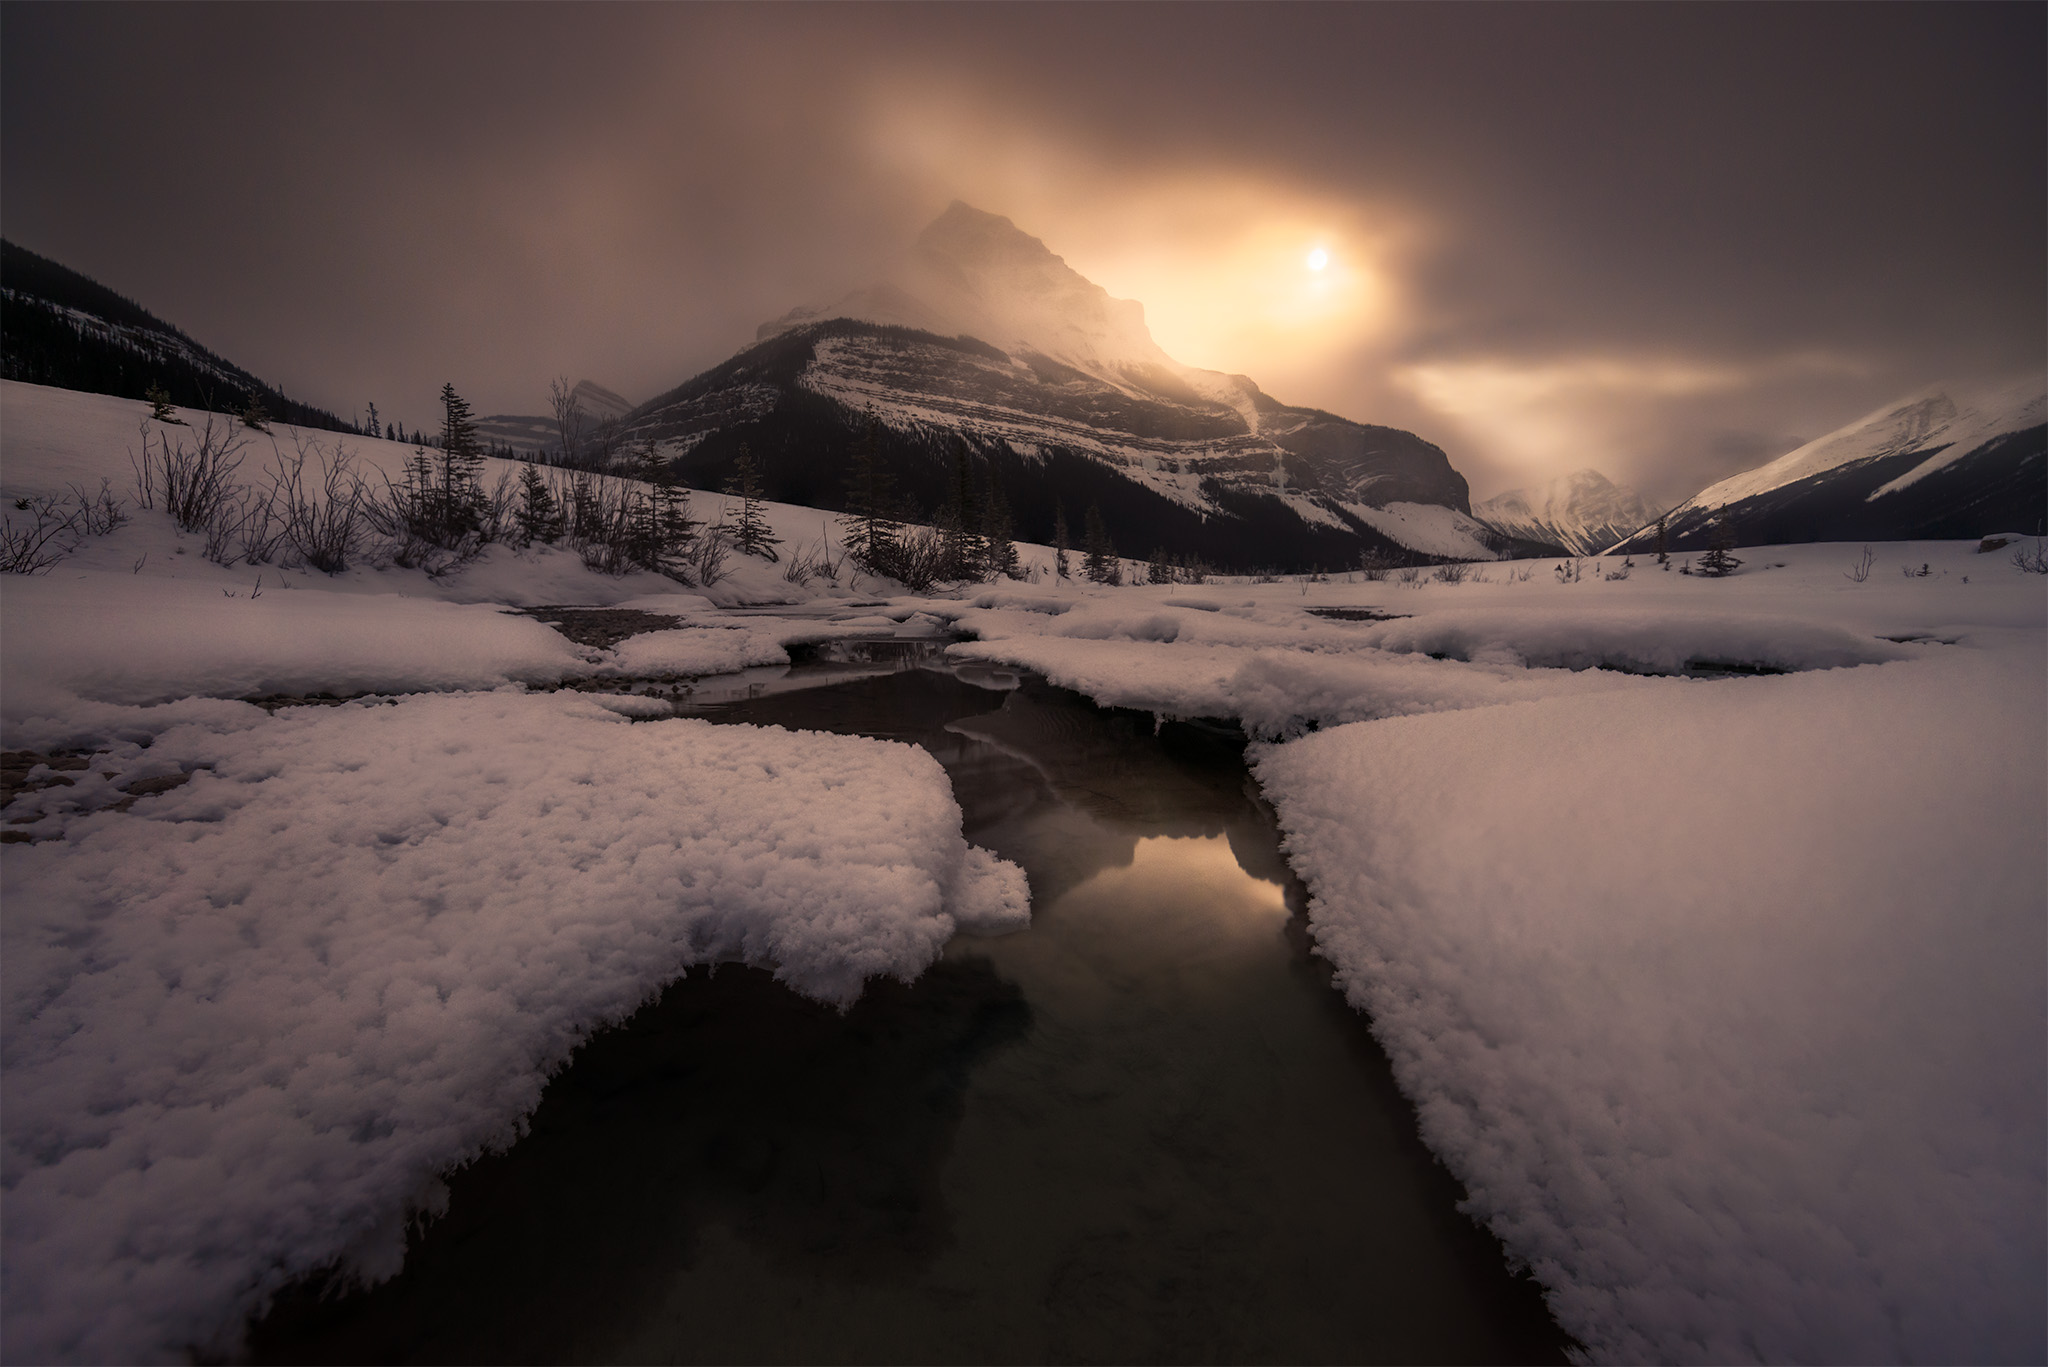 A landscape photograph of Tangle Ridge in Jasper National Park of the moon shining on a winter landscape